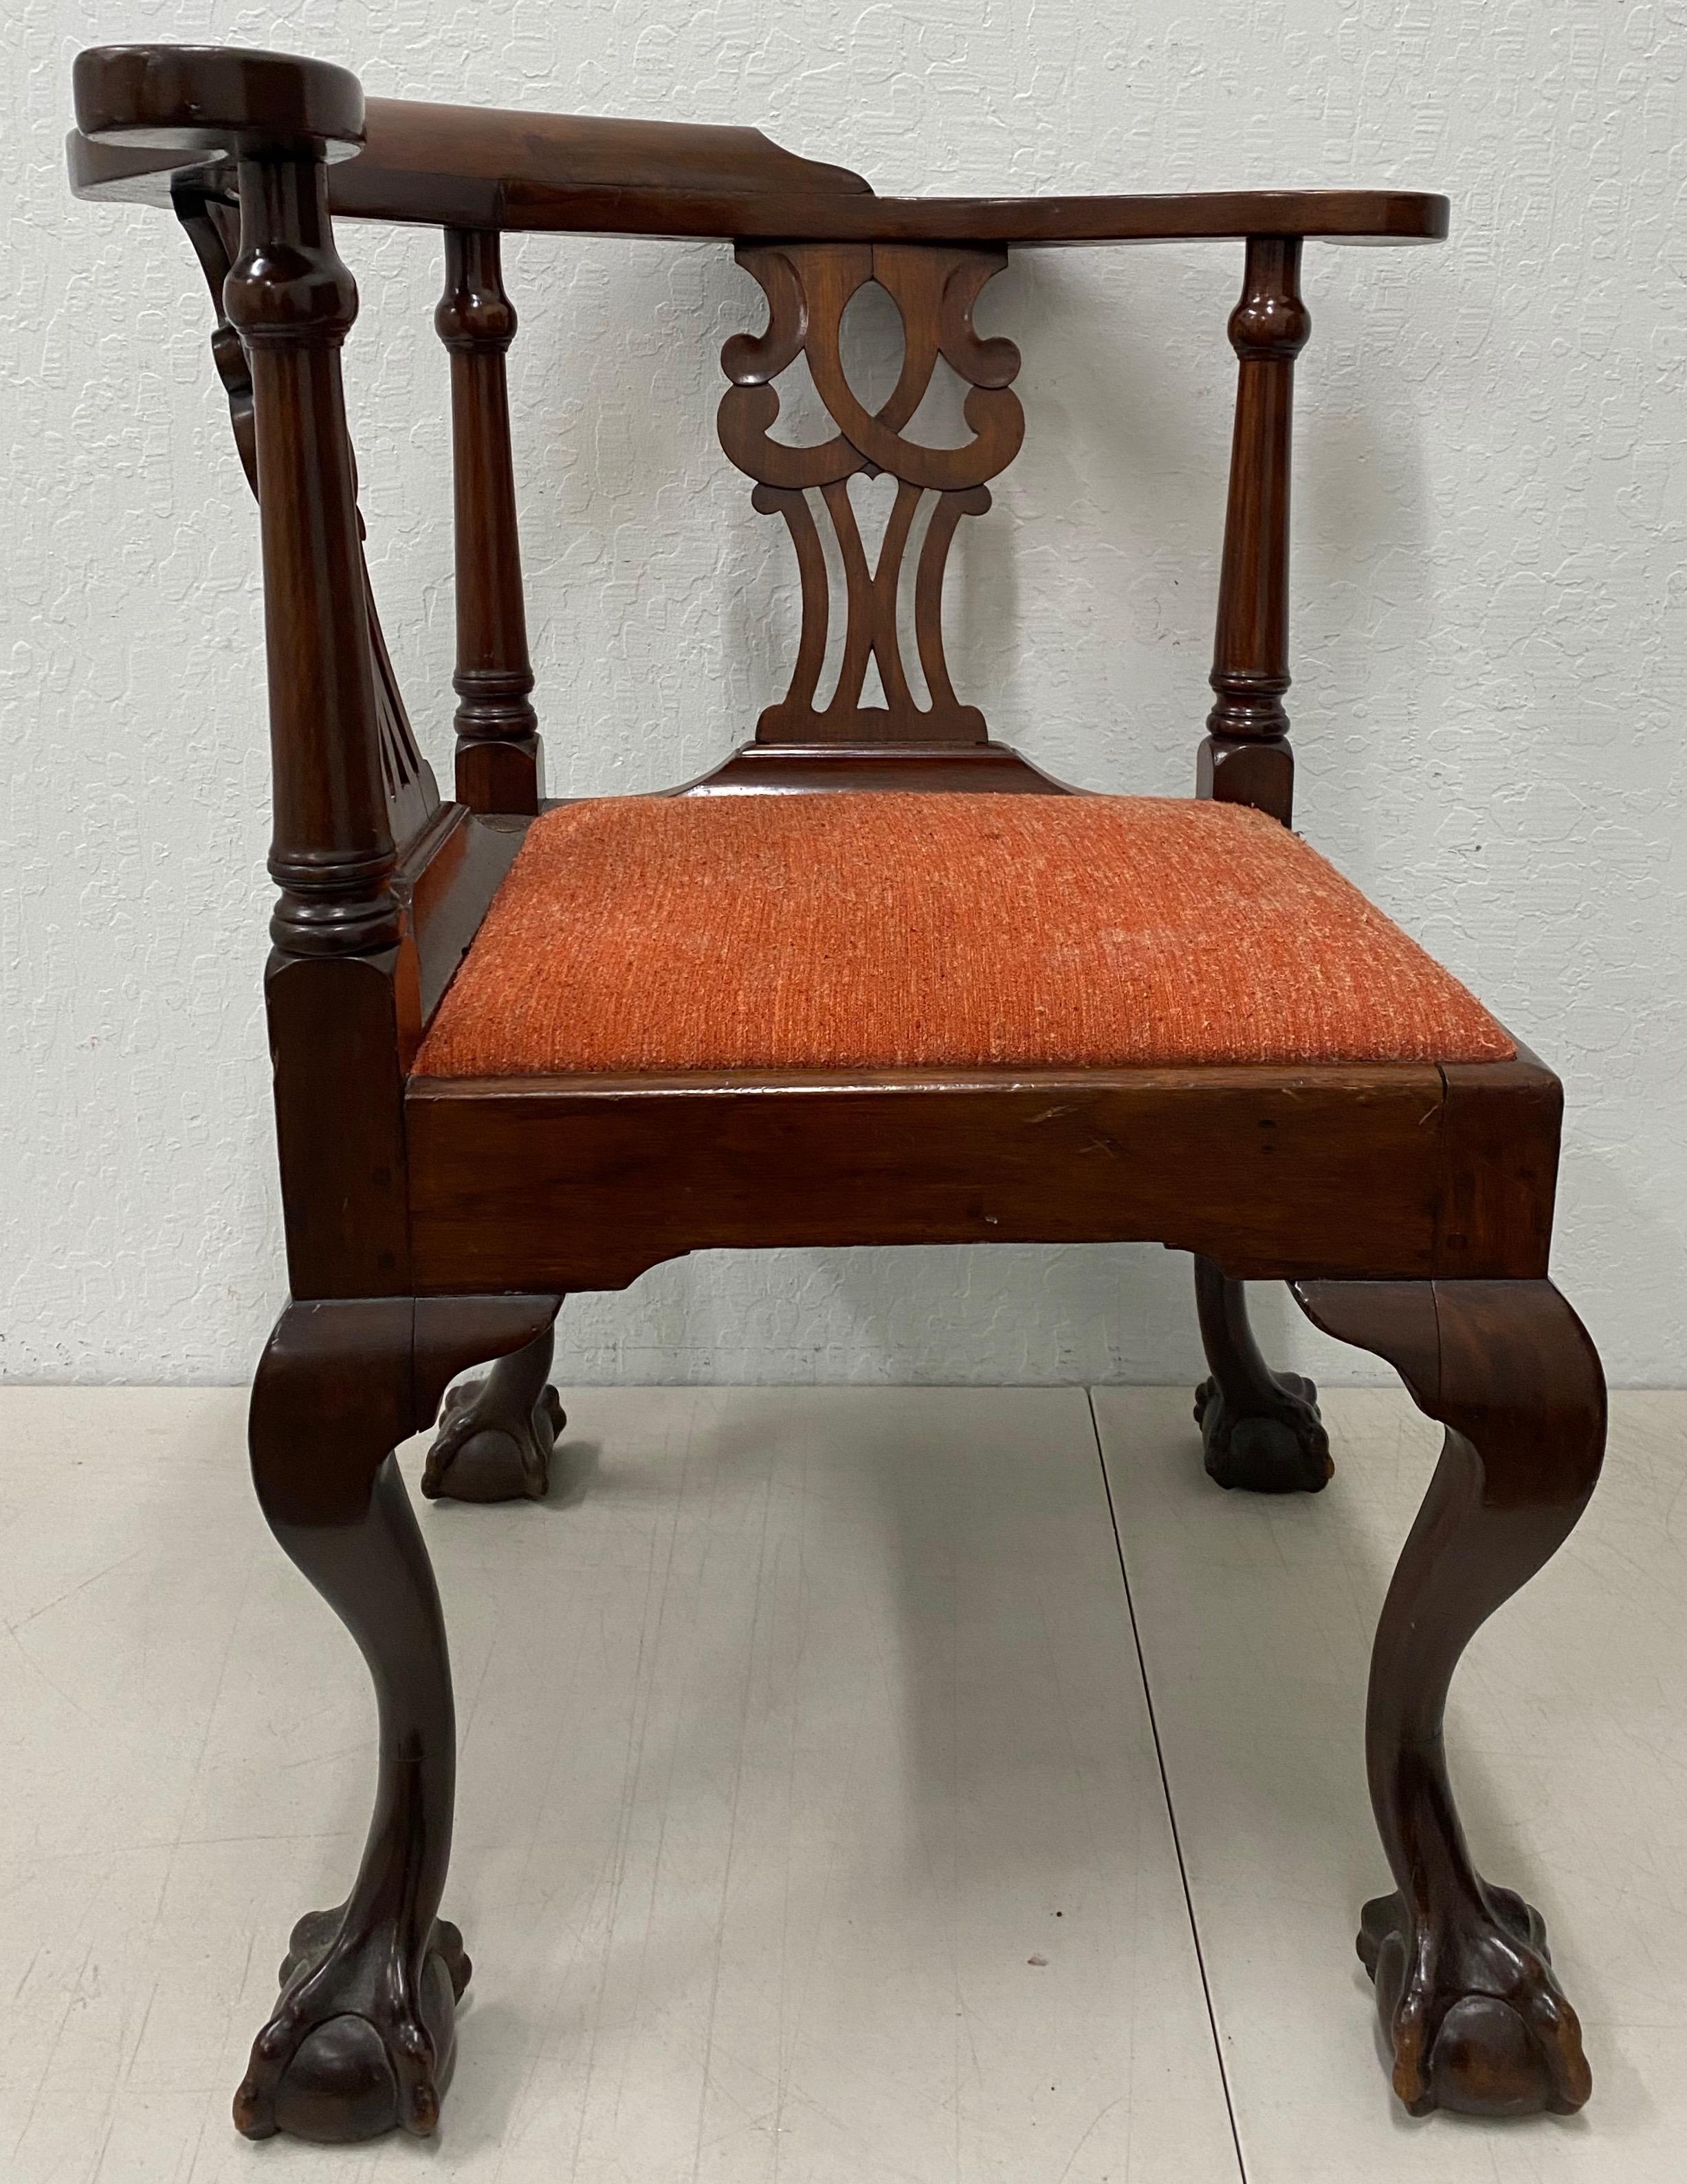 Mid-19th century American Chippendale corner chair, circa 1850s

Hand carved, custom made solid mahogany round-about chair with carved ball and claw feet. The seat lifts up / change fabric with ease. The seat of the chair allows the user to change